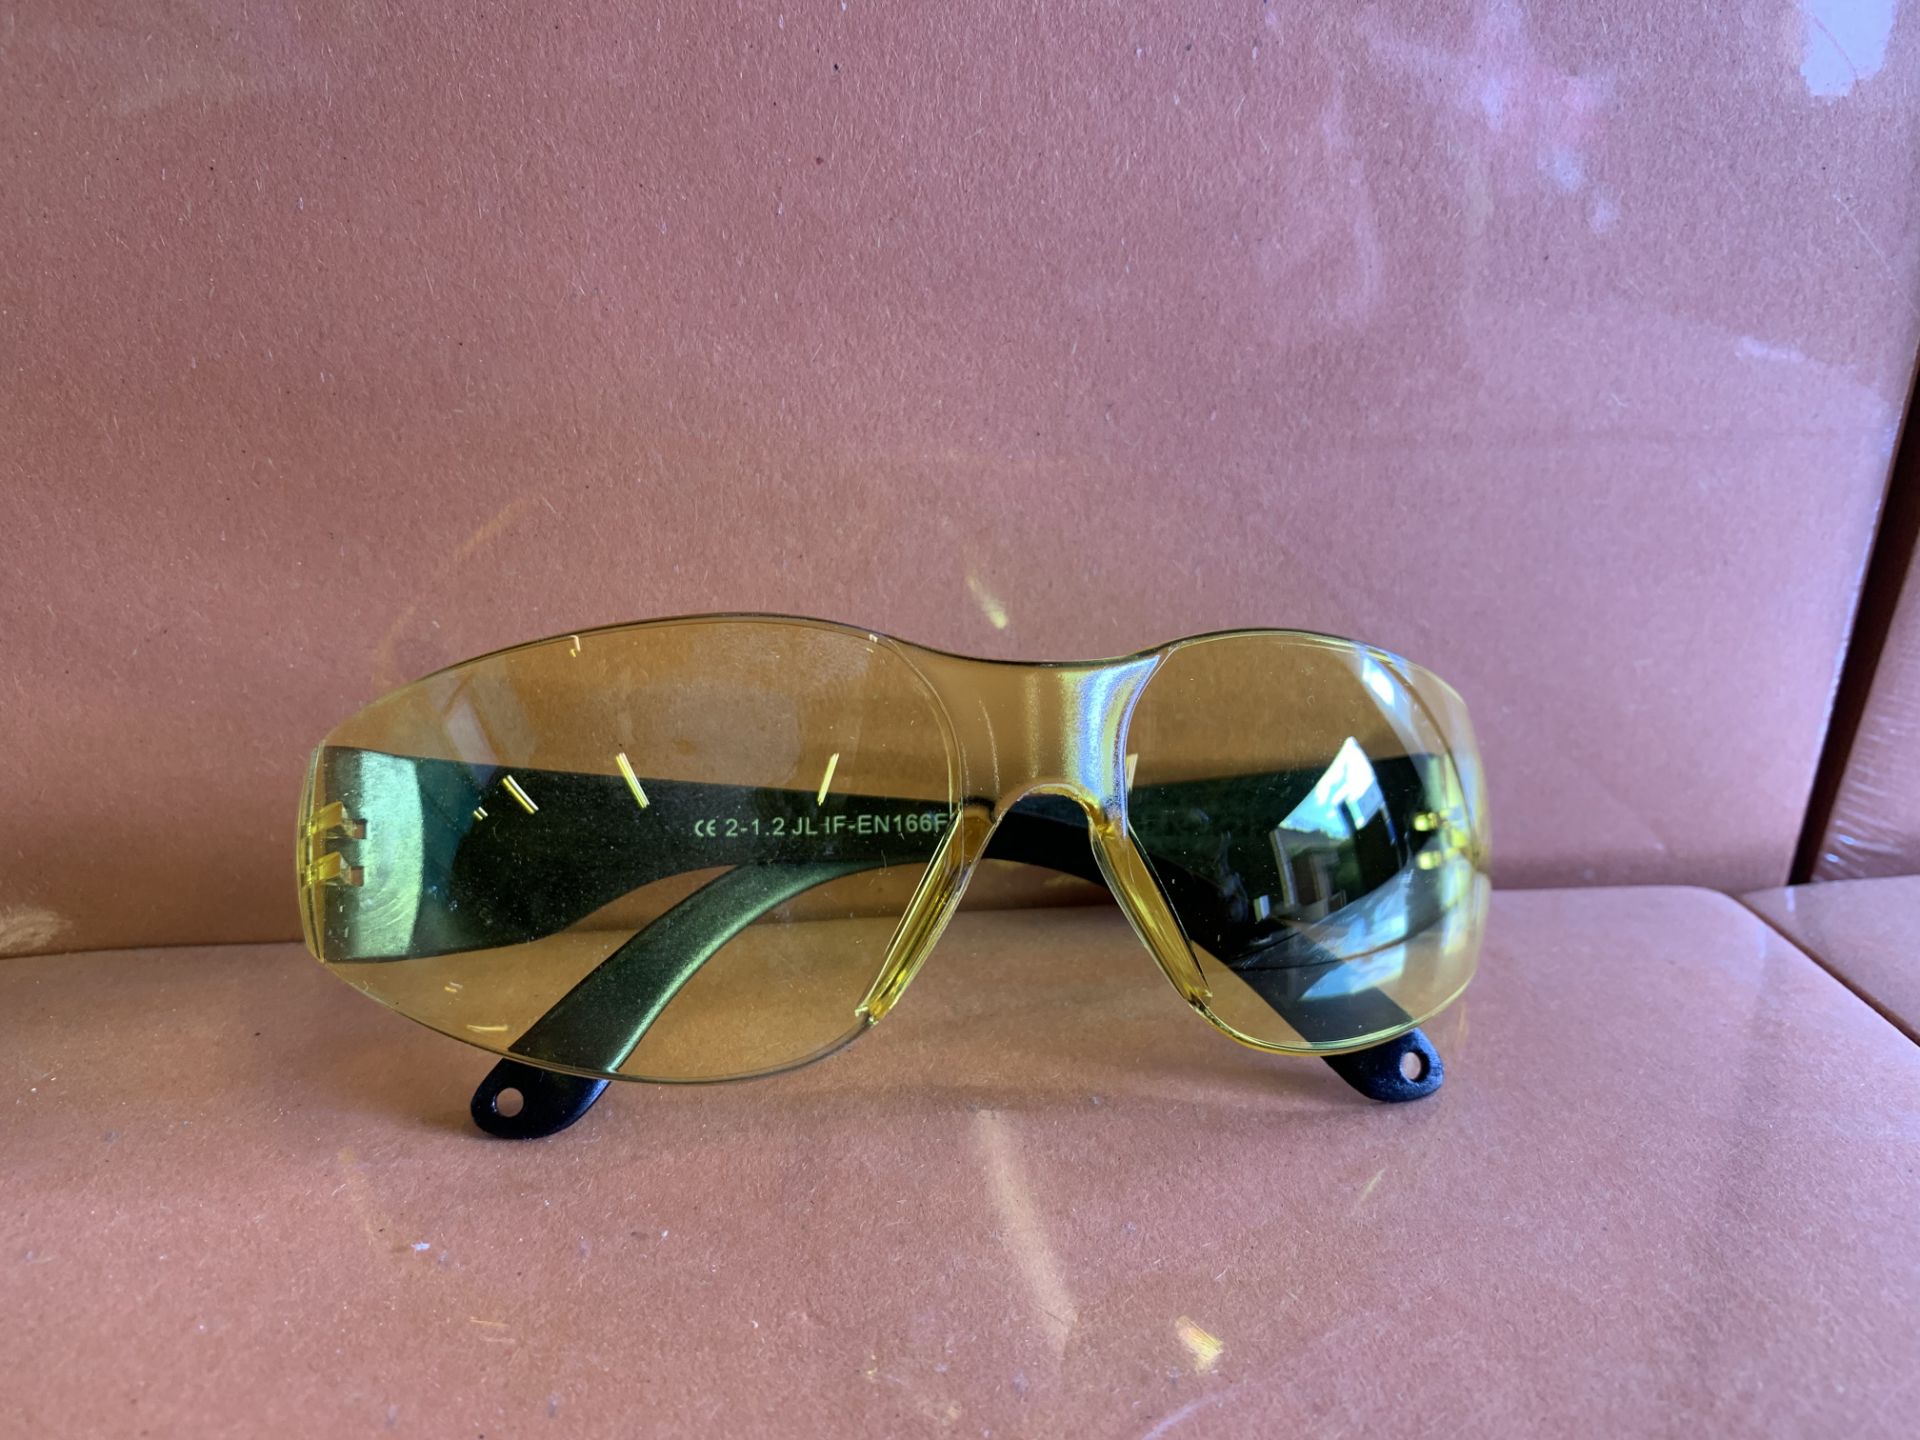 60 x NEW SEALED PAIRS OF 21ST CENTURY SAFETY GLASSES. RRP £8 EACH